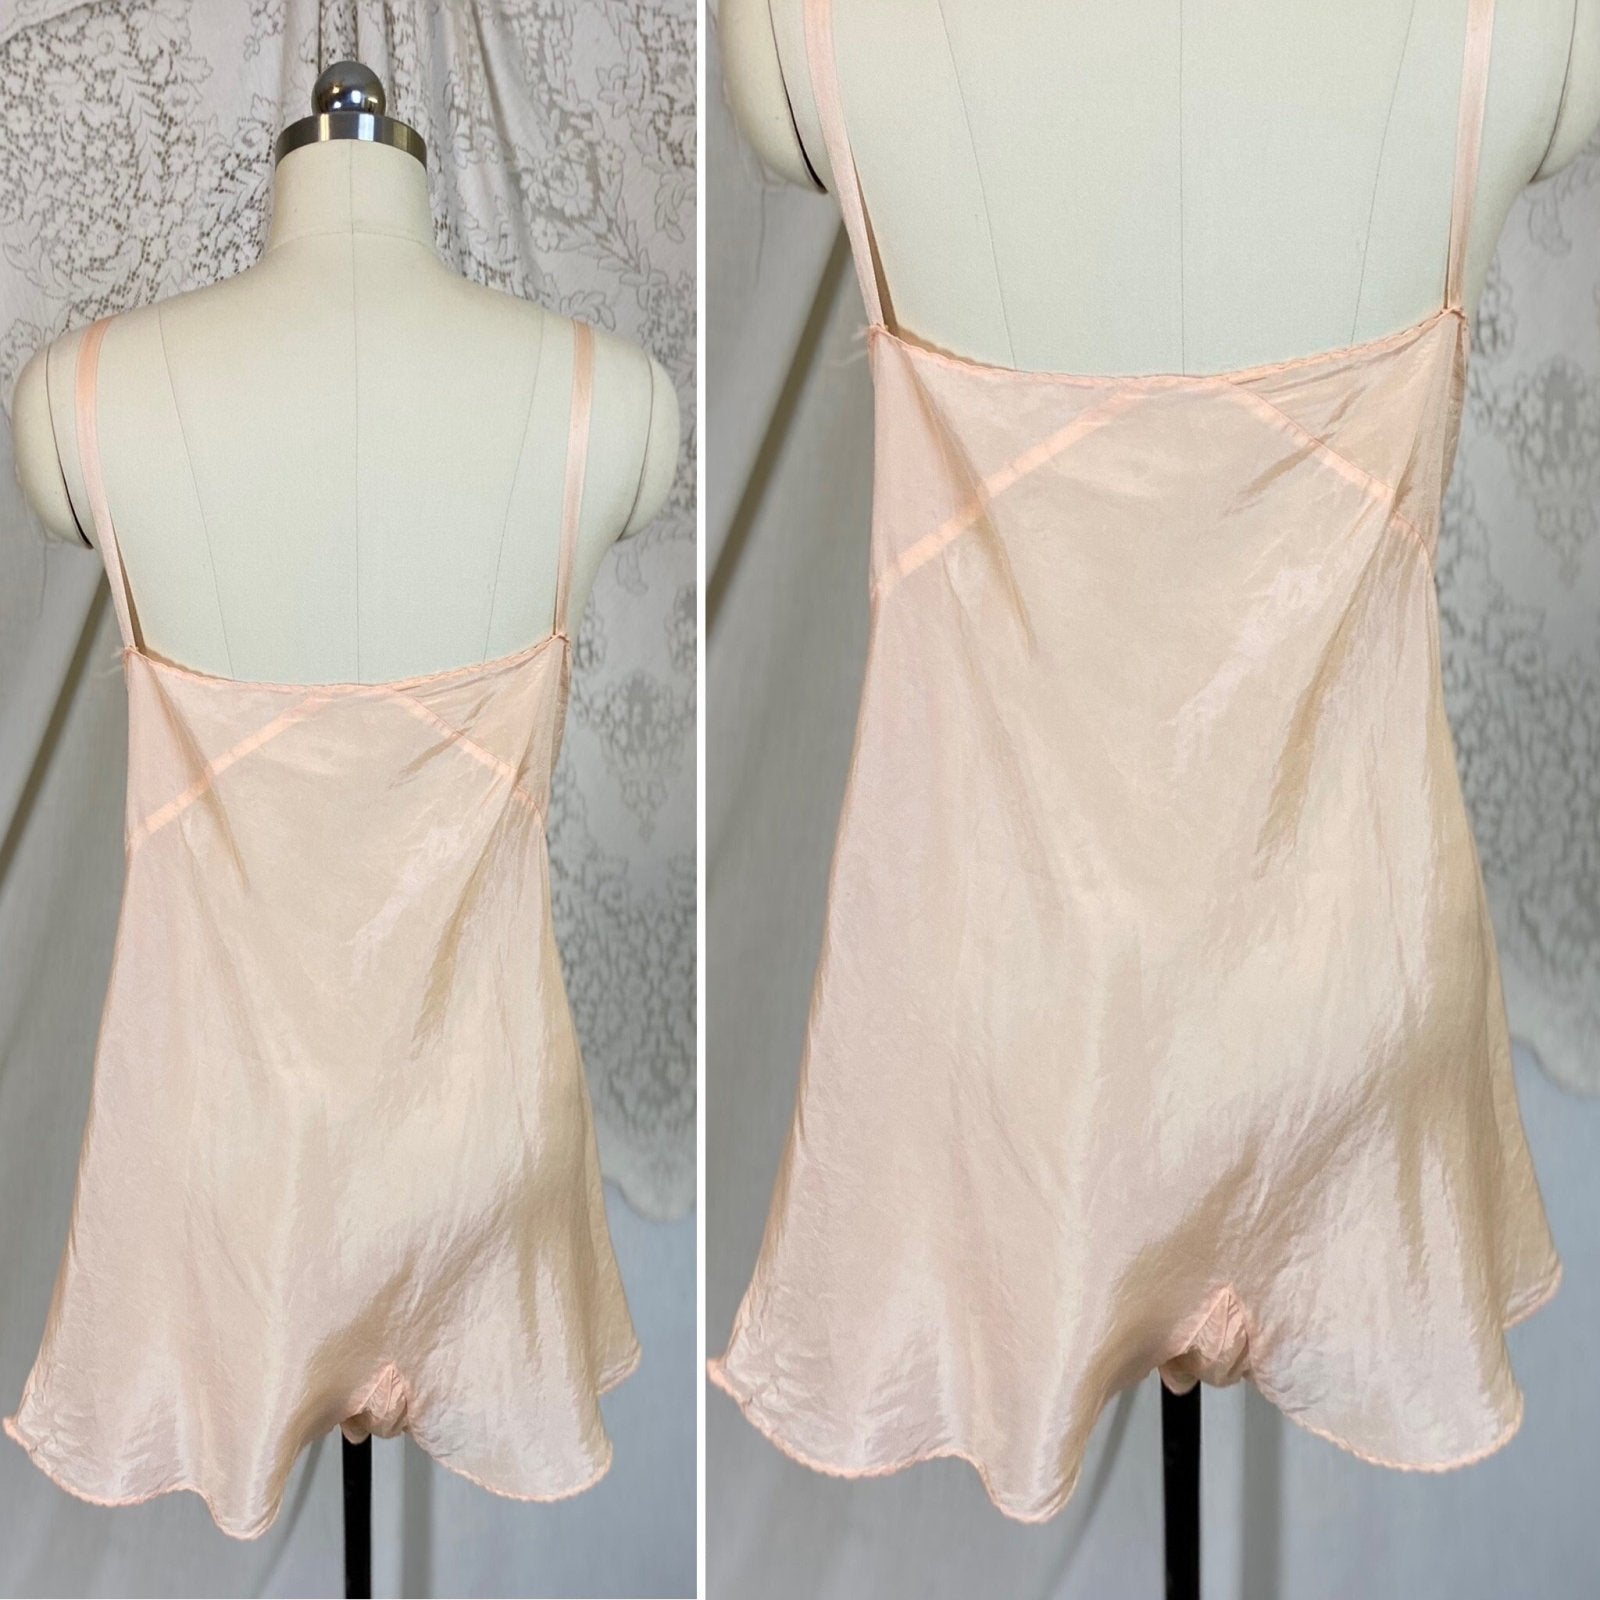 Vintage 1930's Teddy Chemise | Pale Peachy Pink Silk with Satin Trim & Floral Embroidery | Size M, LG - Daggers & Dames